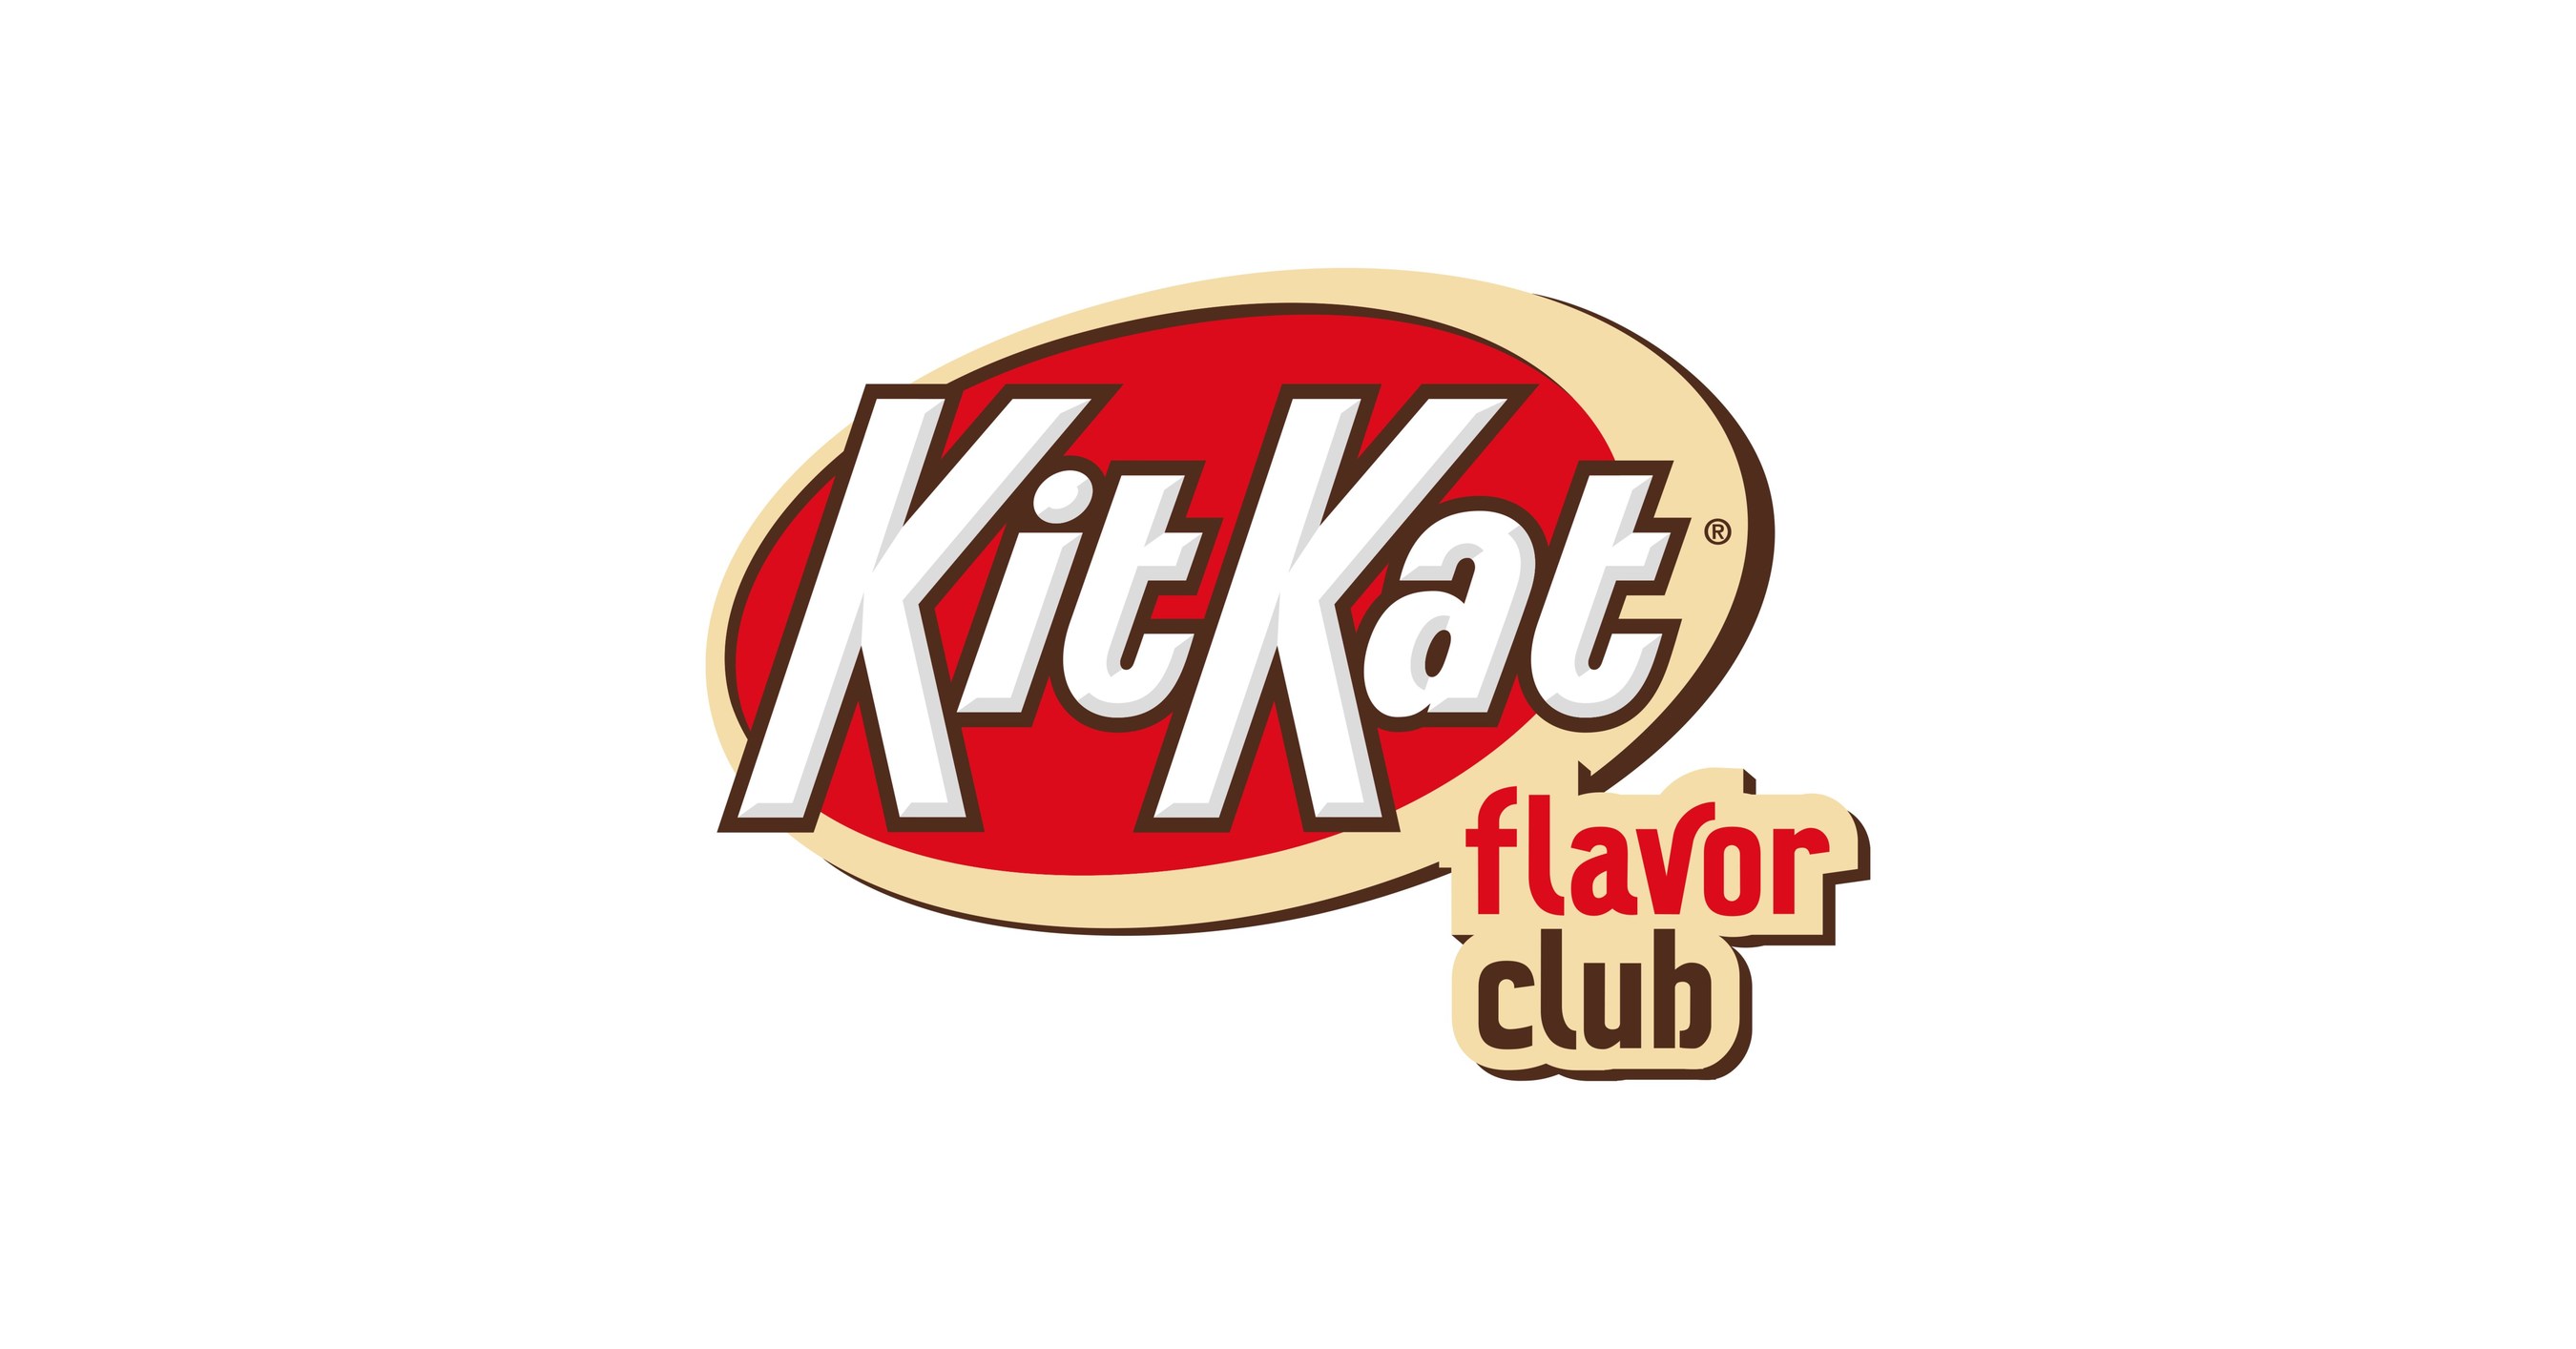 New KIT KAT® Flavor Club Sweepstakes Gives Fans Chance to be Selected to Taste New Flavor Innovations